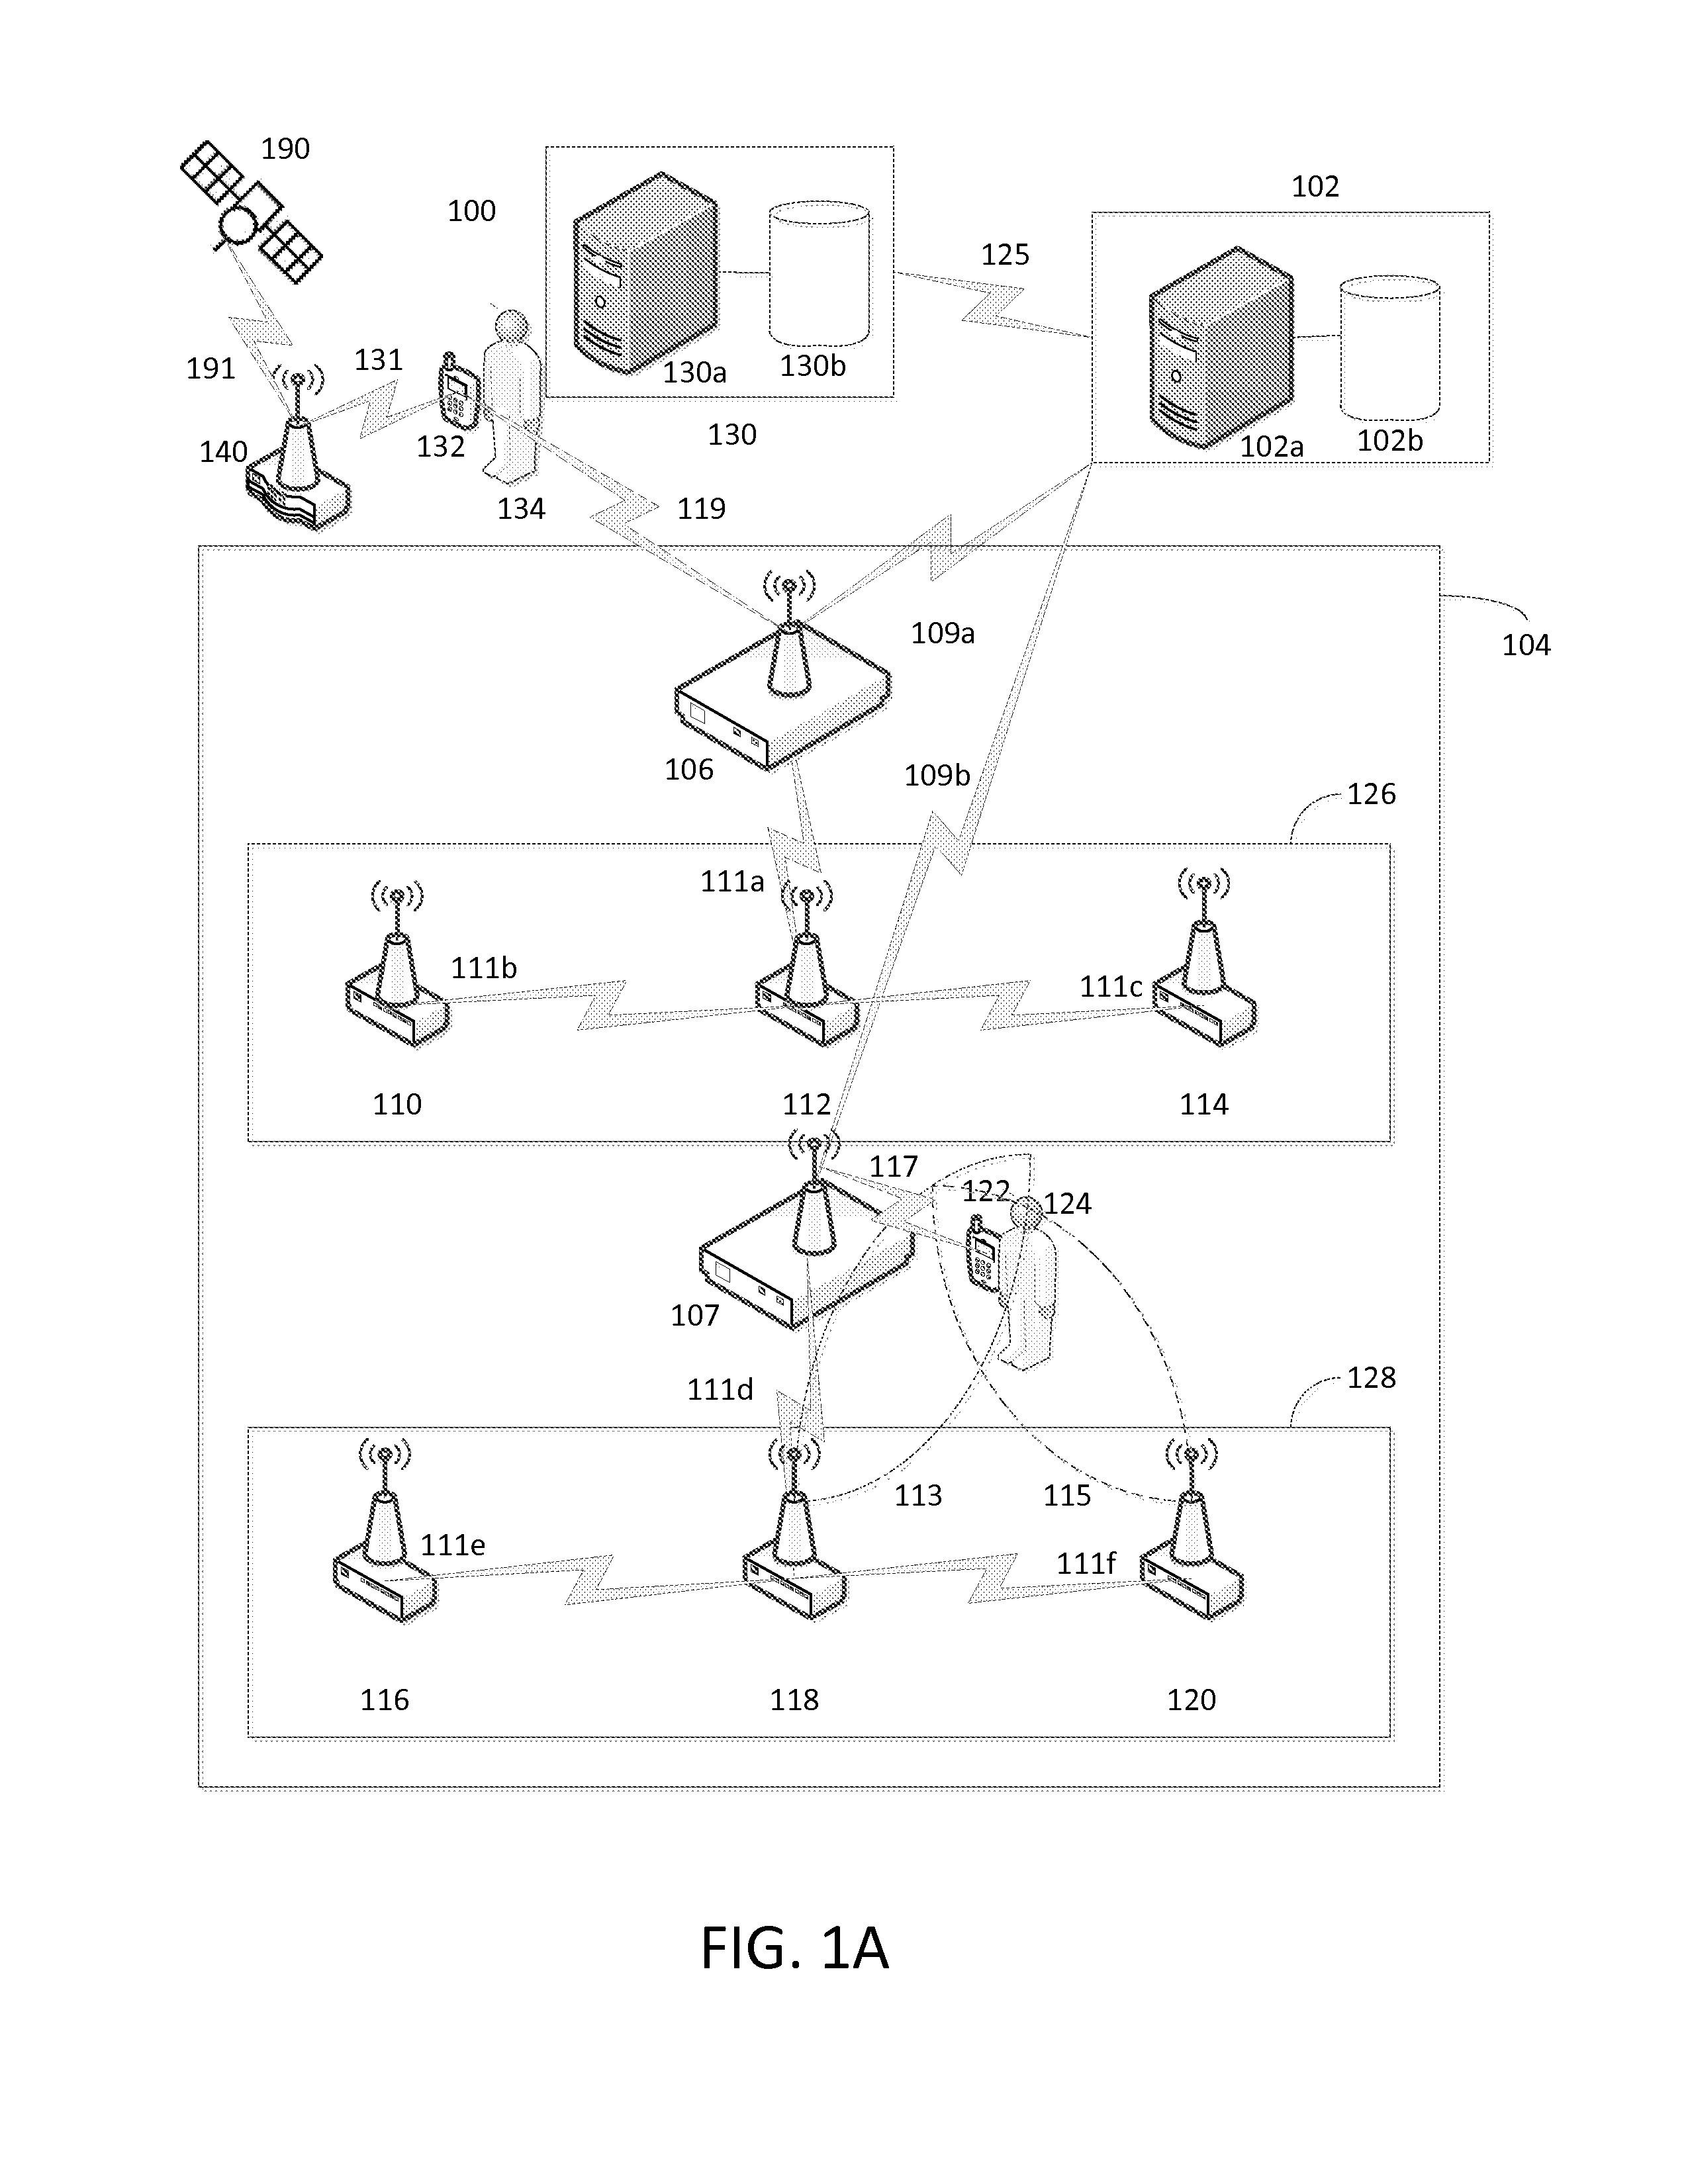 Systems, methods, and devices for interactive marketing with attribution using proximity sensors